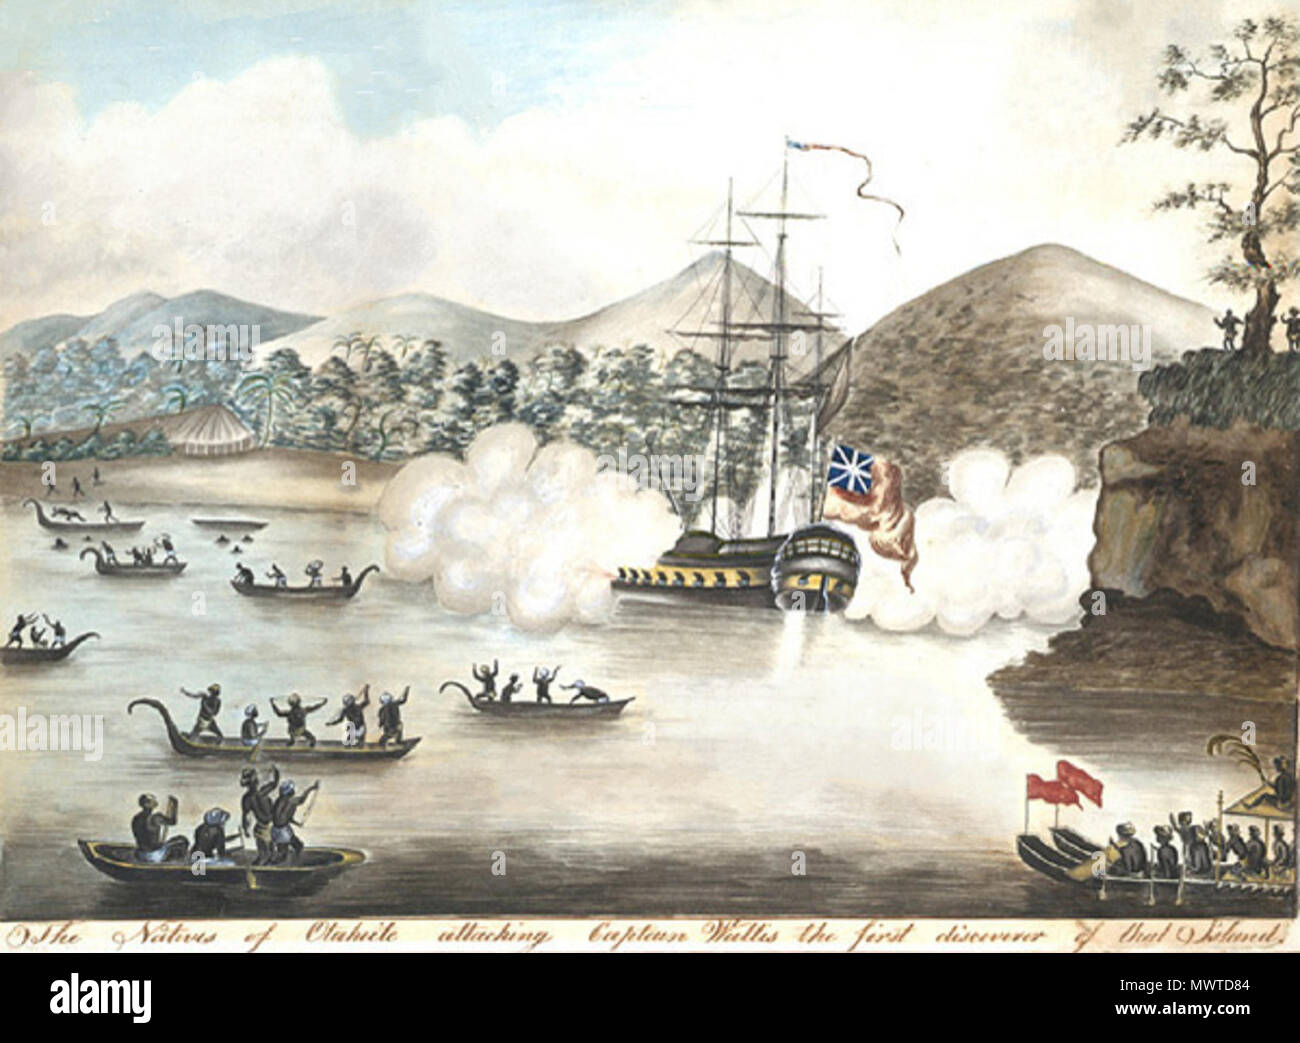 . The Natives of Otaheite Attacking Captain Wallis the First Discoverer of That Island by an unknown artist . 12 September 2011, 01:36 (UTC).  The Natives of Otaheite Attacking Captain Wallis the First Discoverer of That Island.jpg: Unknown derivative work: Materialscientist (talk) 598 The Natives of Otaheite Attacking Captain Wallis retouched Stock Photo